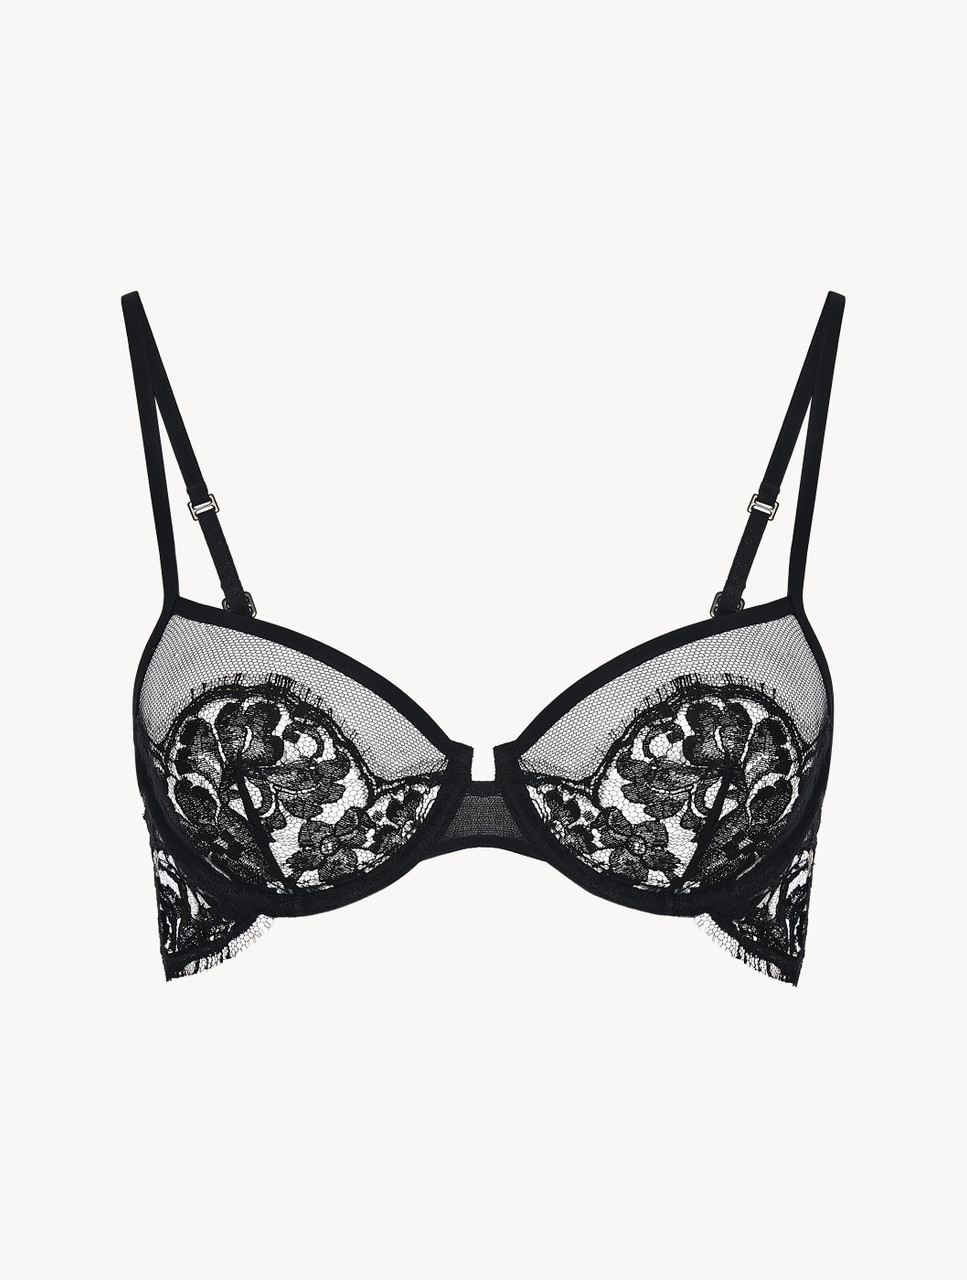 Push-up bra in black with French Leavers lace - La Perla - Russia